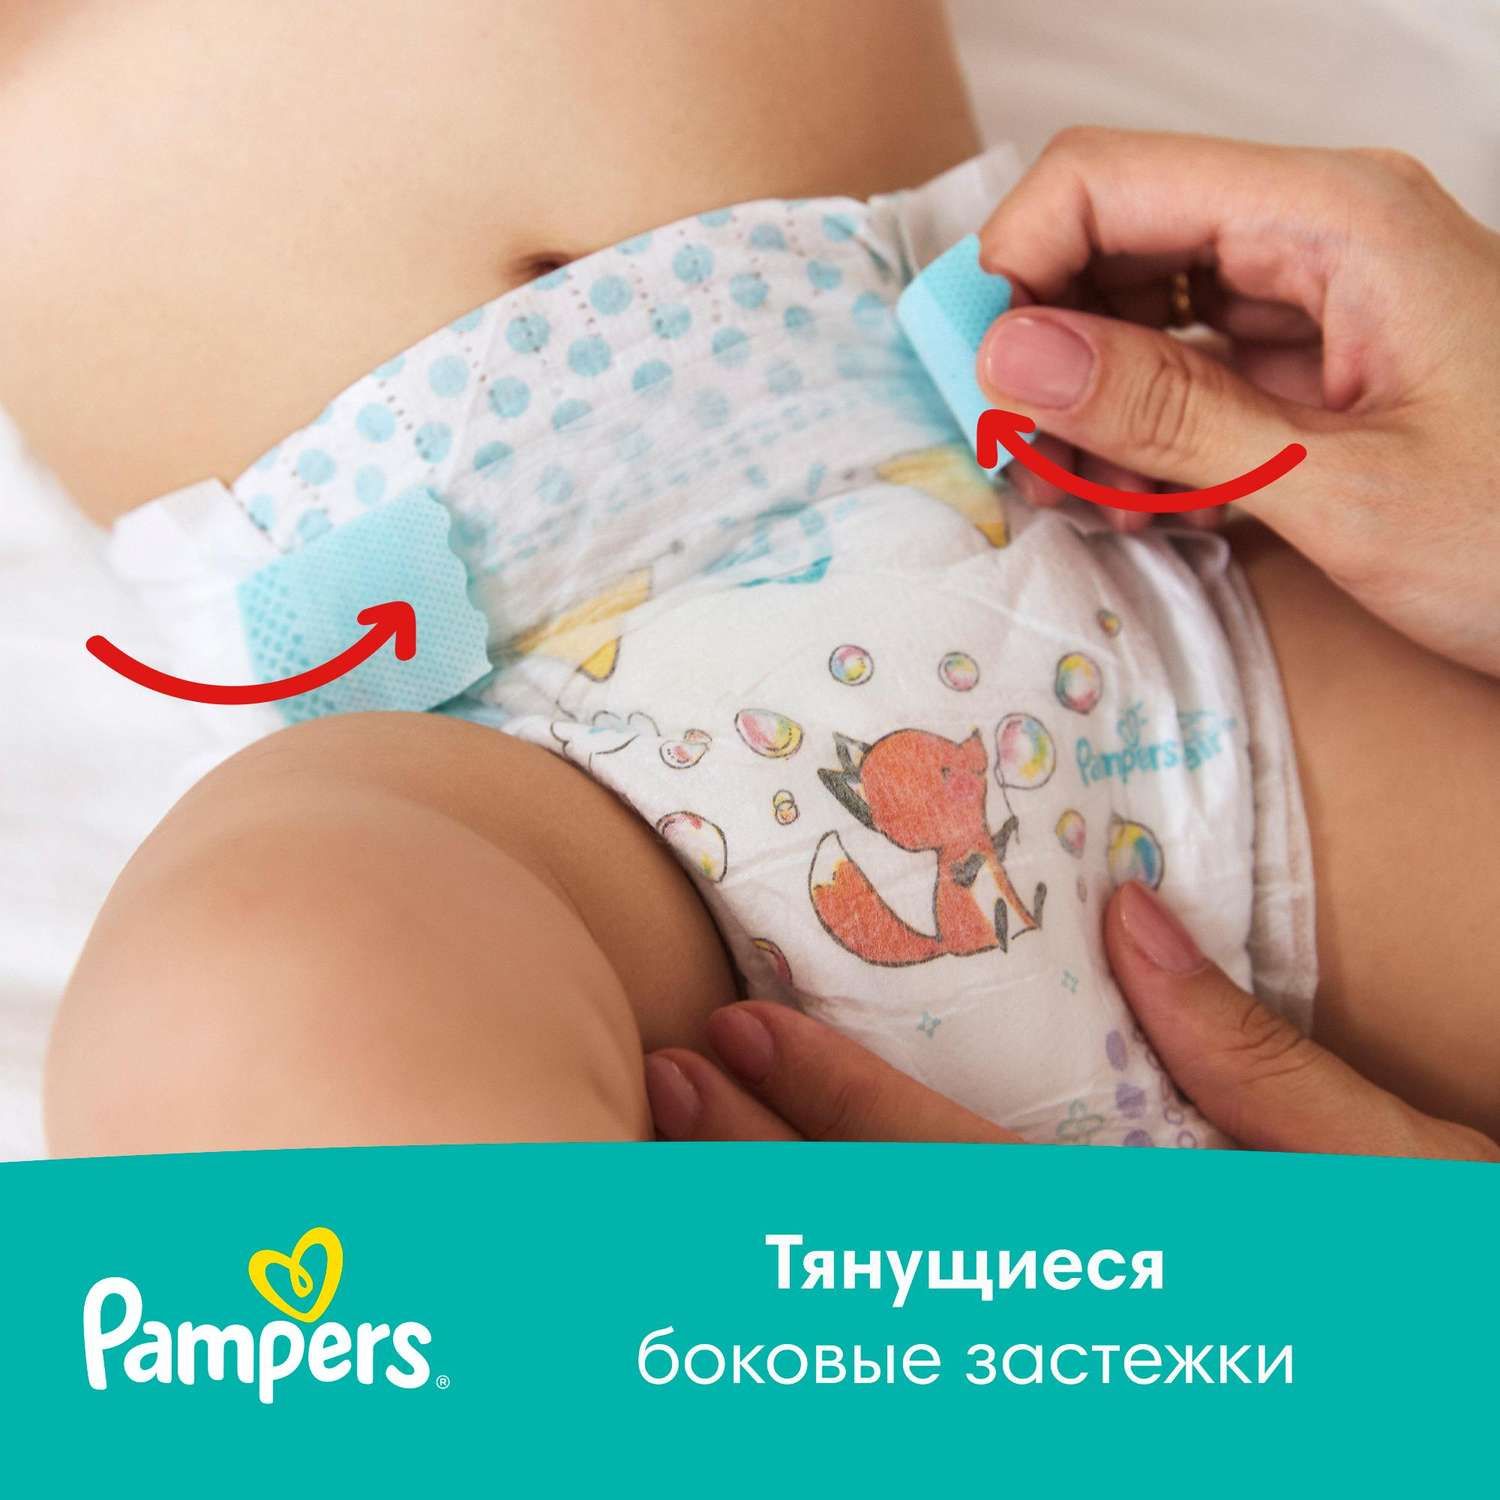 Pampers New Baby-dry, Taille 2, 10 Couches, 3-8 kg, Wlidaty Maroc